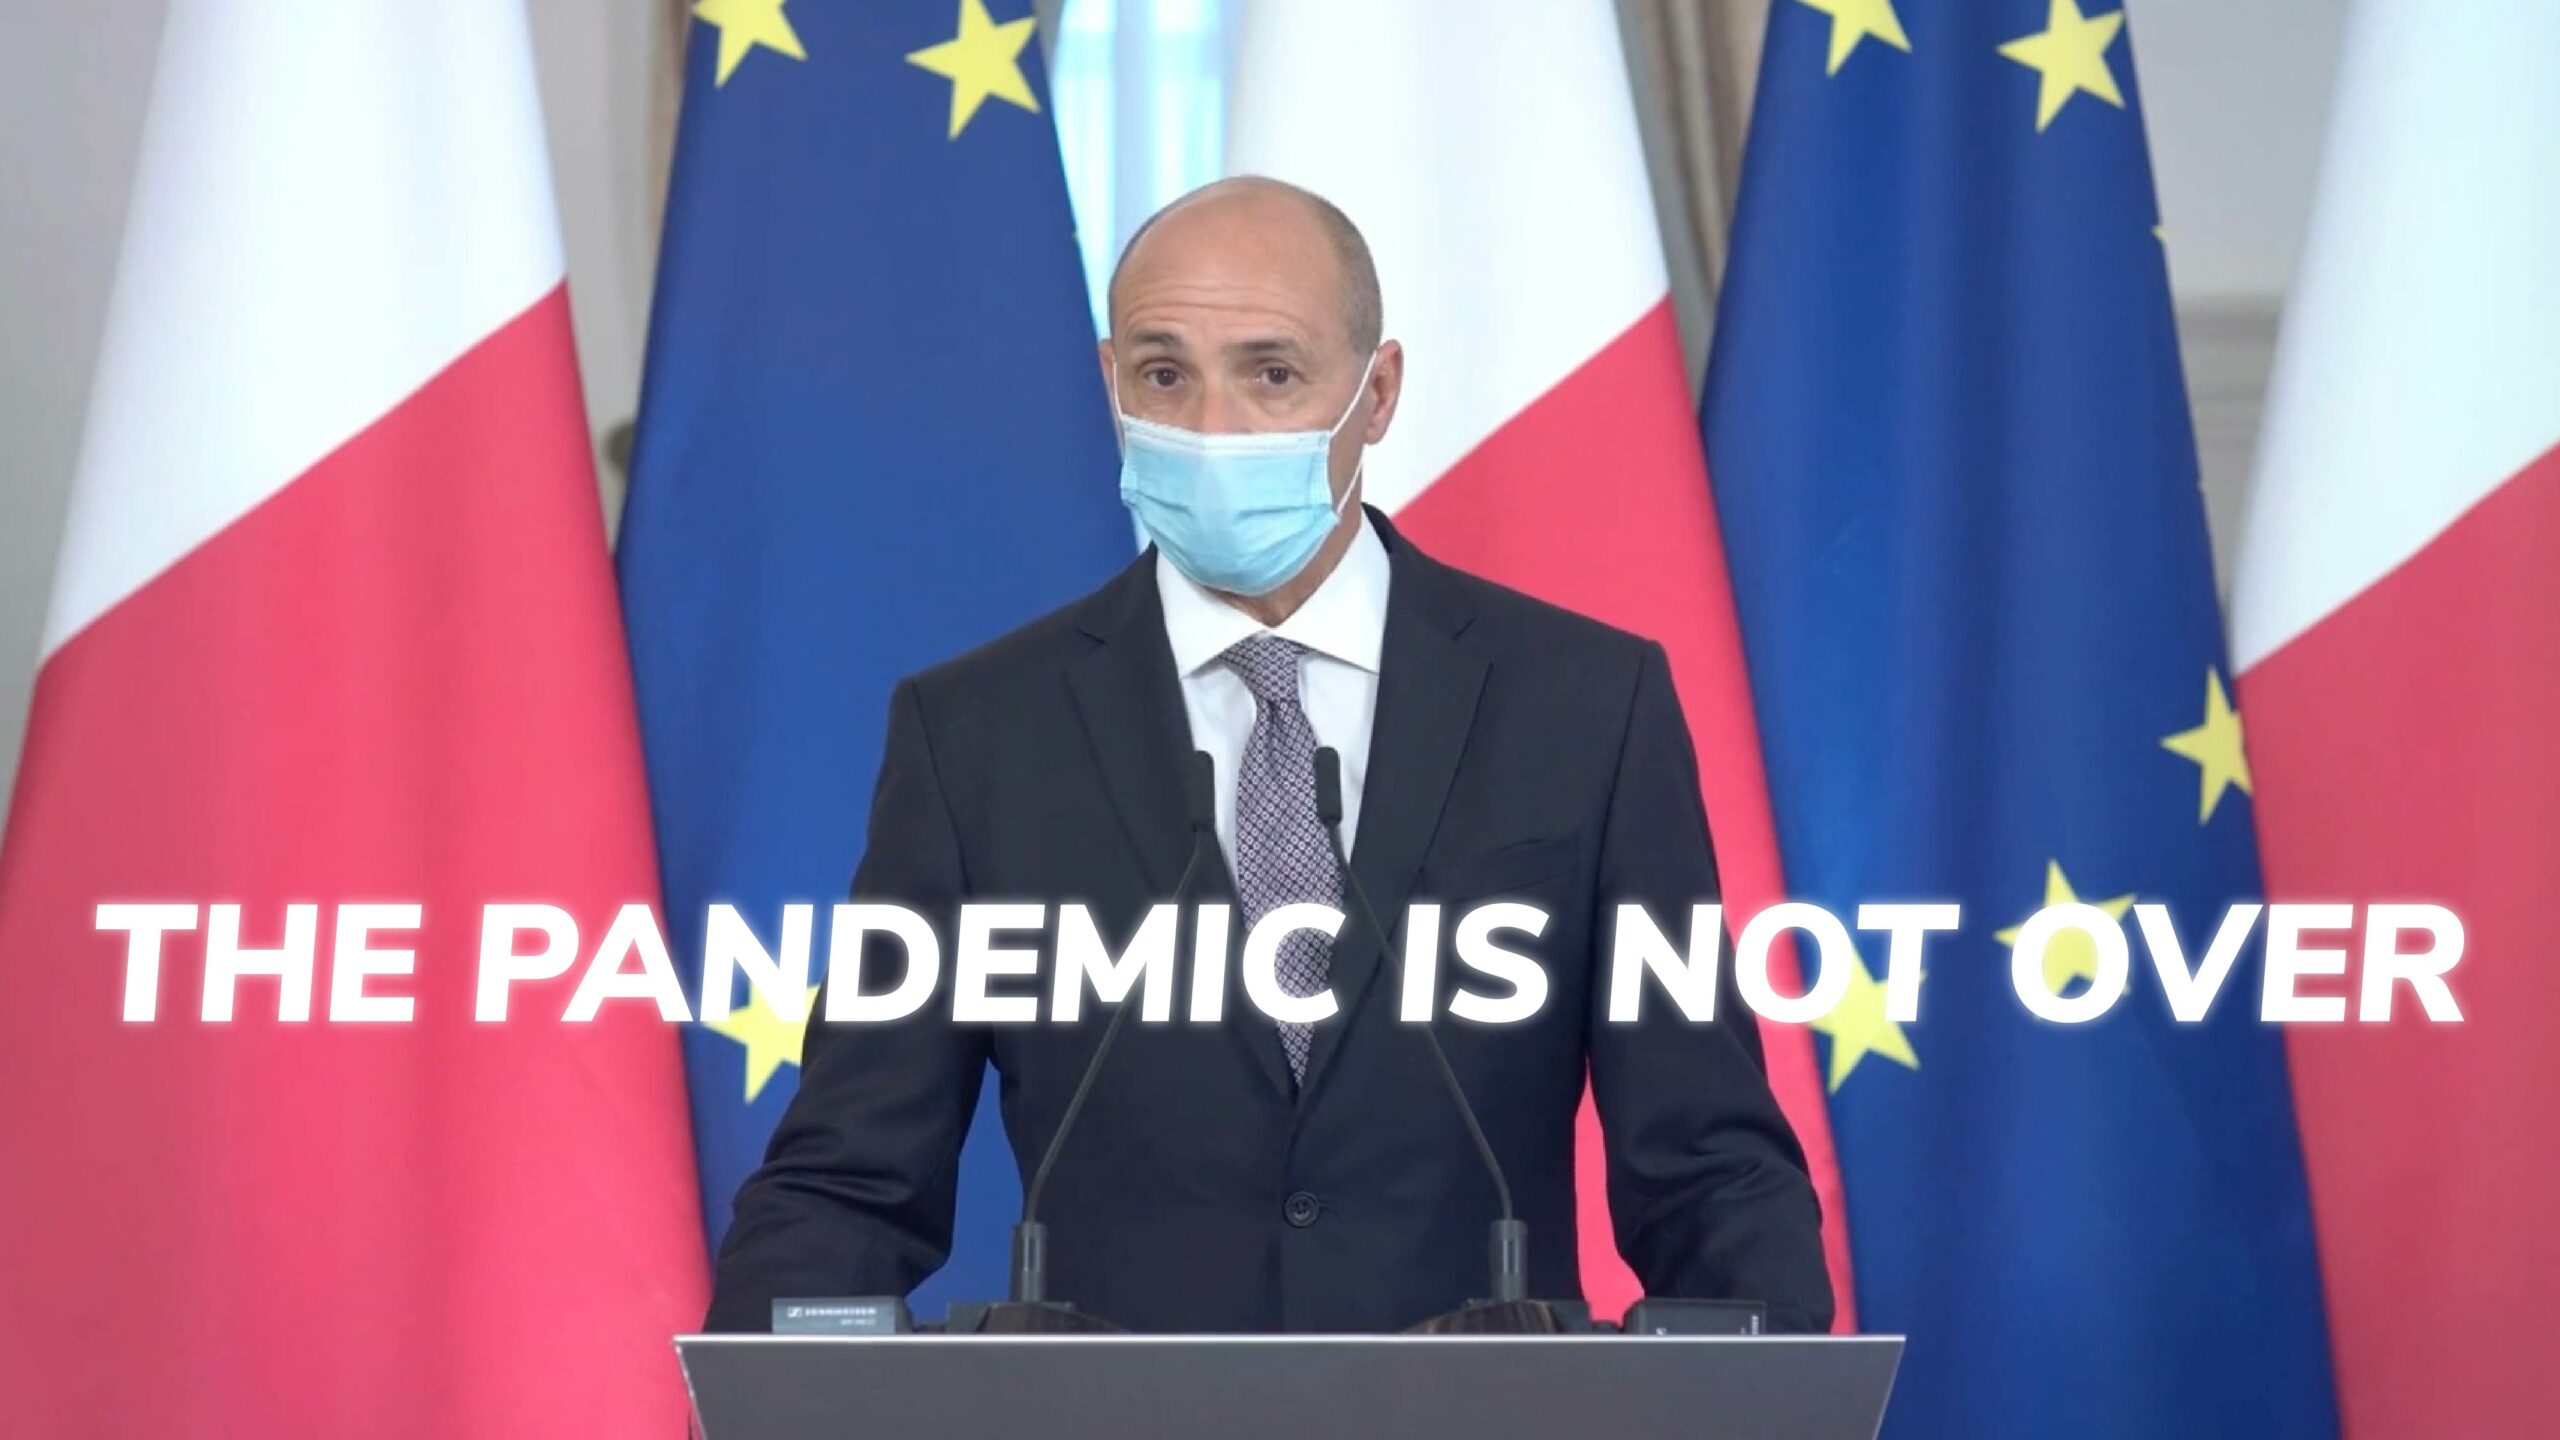 "The pandemic is not over": Chris Fearne appeals for caution after easing of measures